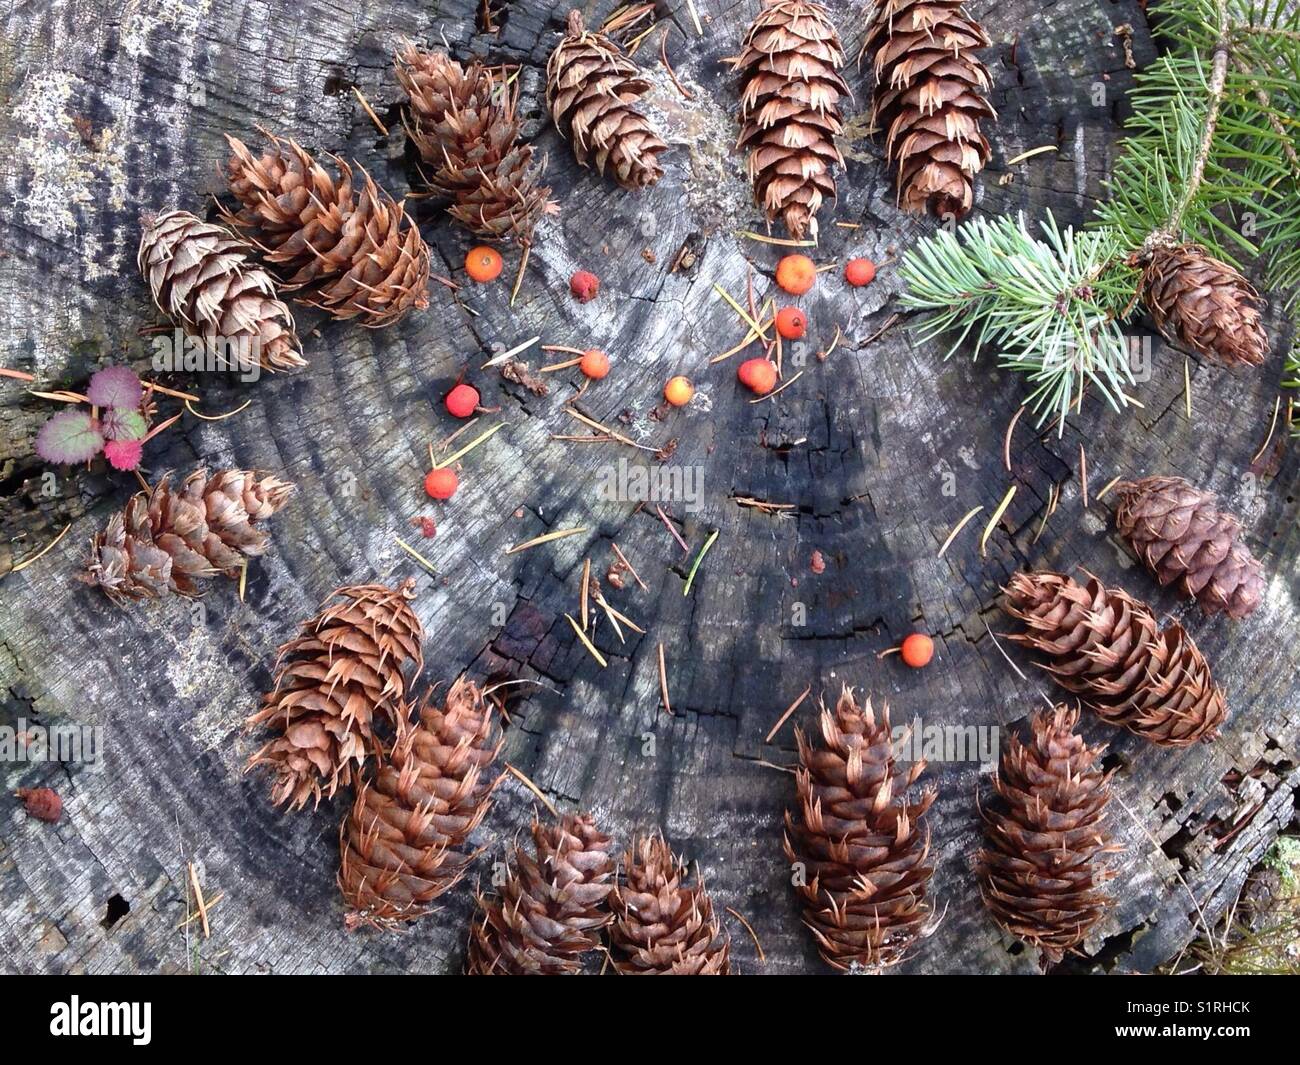 Pine cones displayed on a tree stump following a windy day in the Pacific Northwest, USA Stock Photo